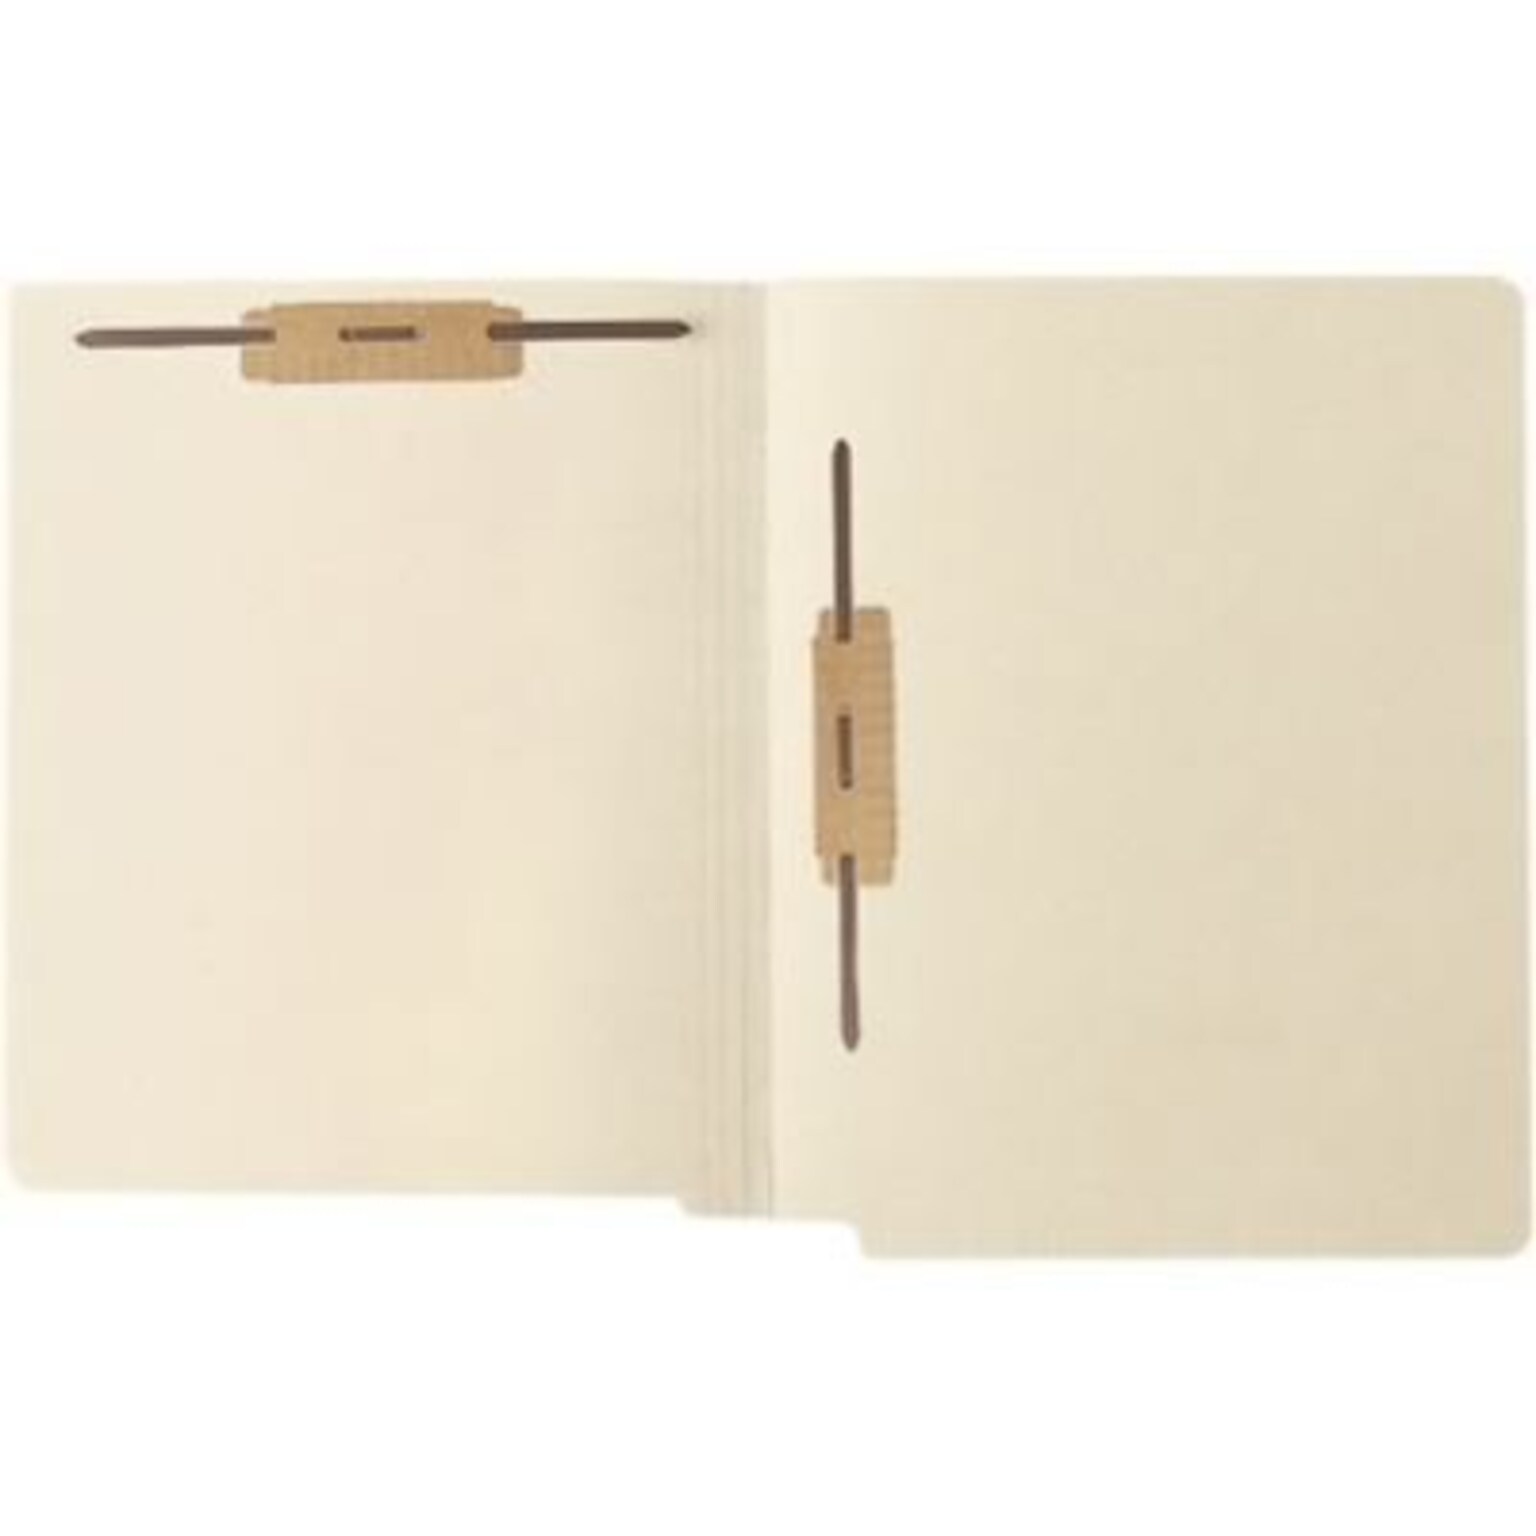 Medical Arts Press® 14 pt. Full-Cut End-Tab File Folders, Two Fasteners, Position 3&5, 250/Bx